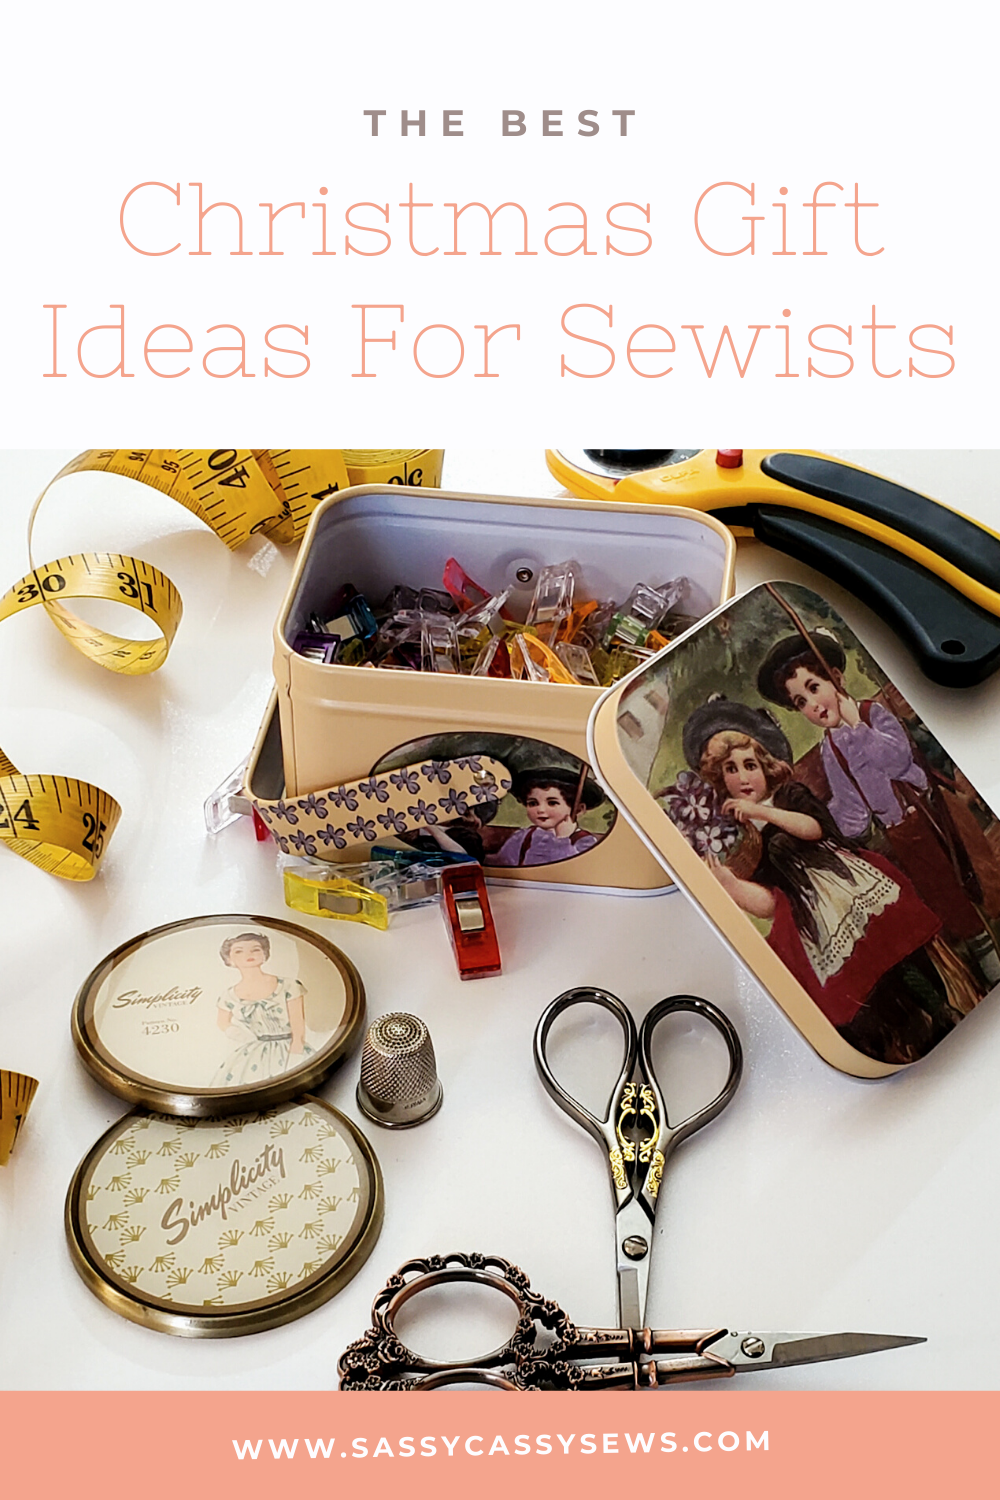 Top 10 Gifts for Sewists for Under !